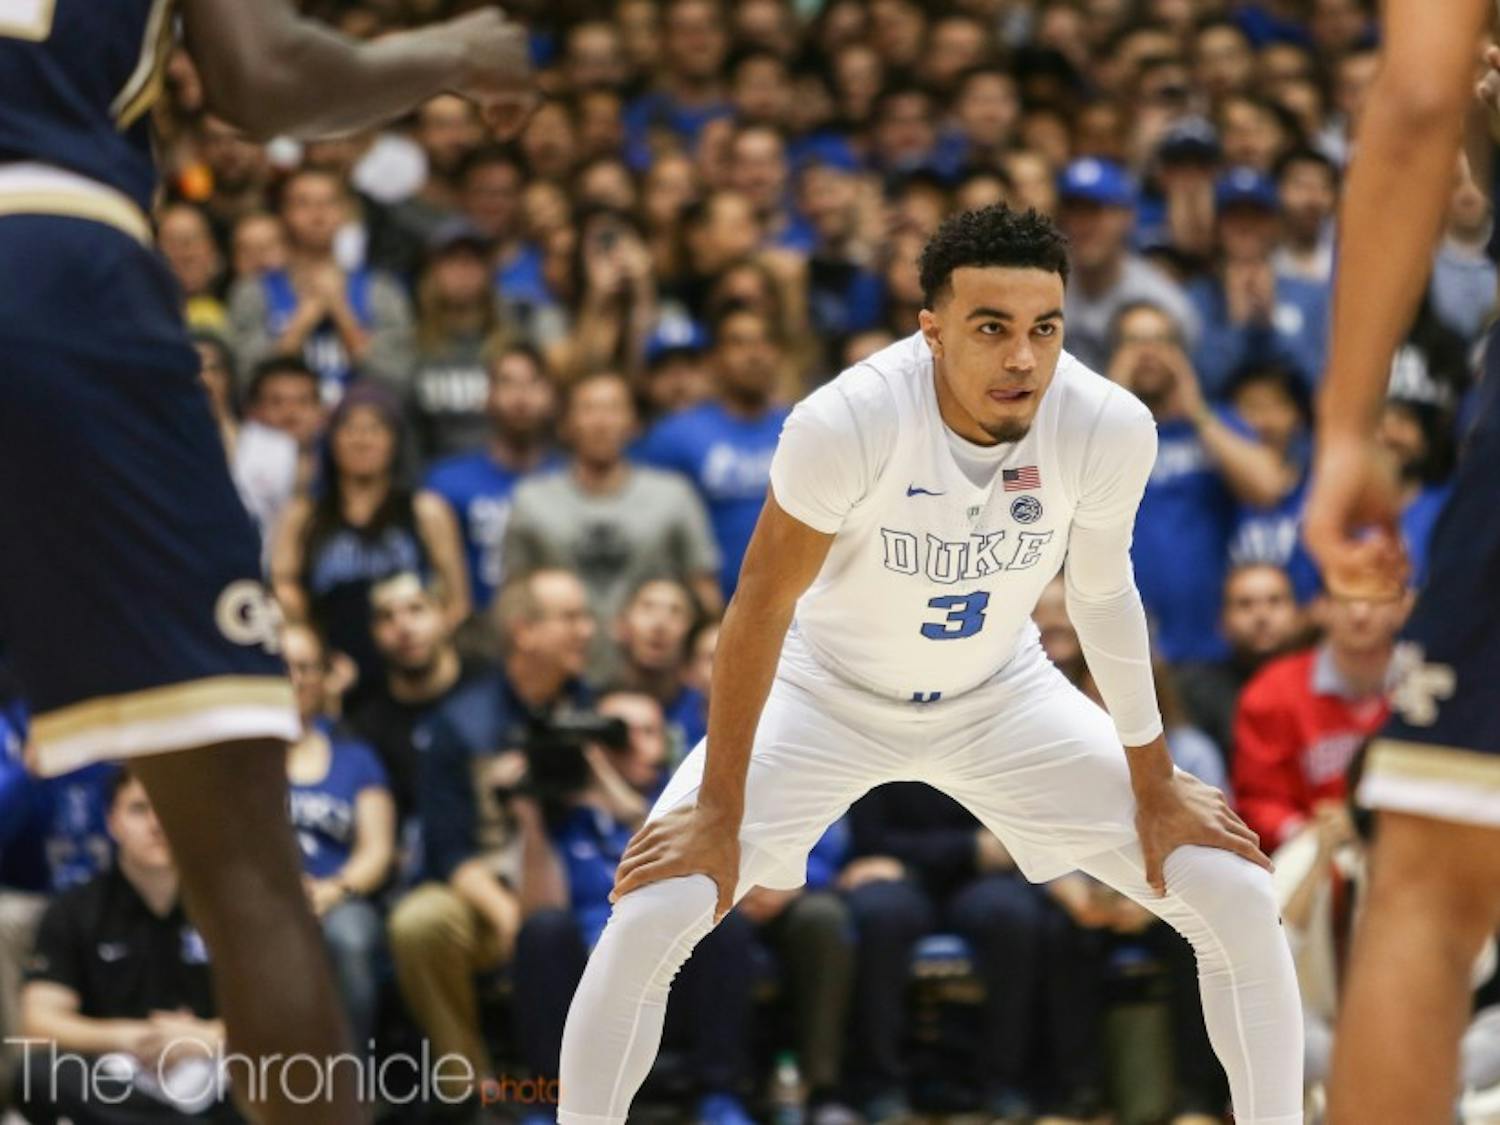 Here are Associate Photo Editor Mary Helen Wood and photographer Aaron Zhao's best shots from Duke's 66-53 win over the Georgia Tech Yellow Jackets.